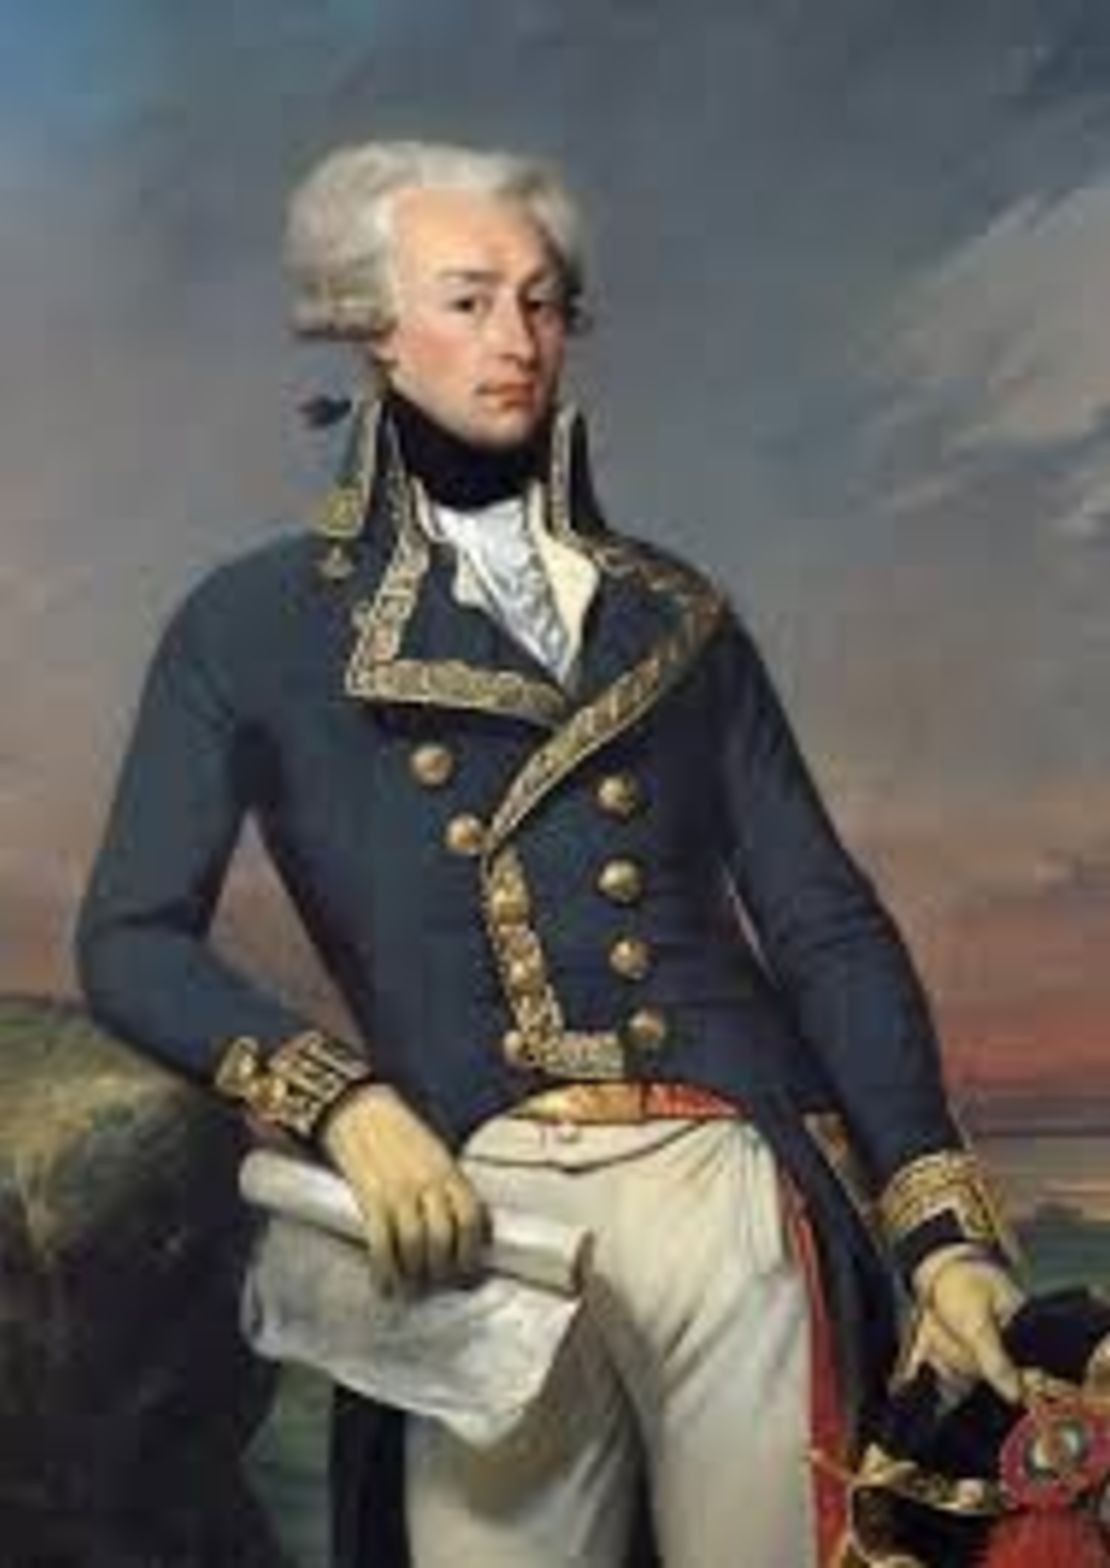 The Marquis de Lafayette fought as a general in George Washington's army.